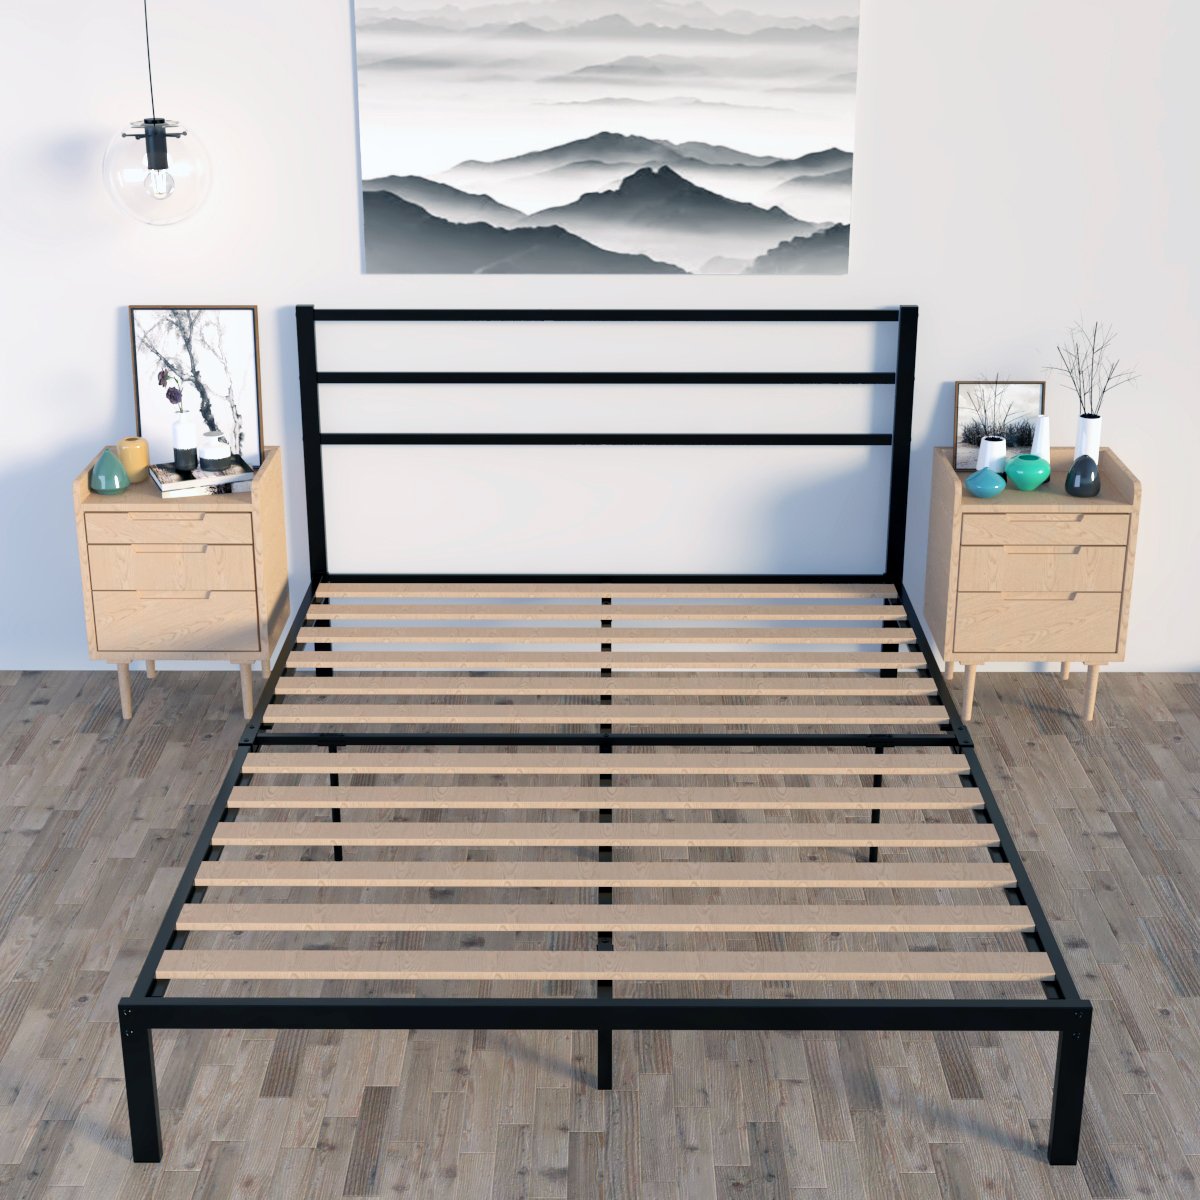 Queen Box Spring Replacement Metal Platform Bed Frame Size ...